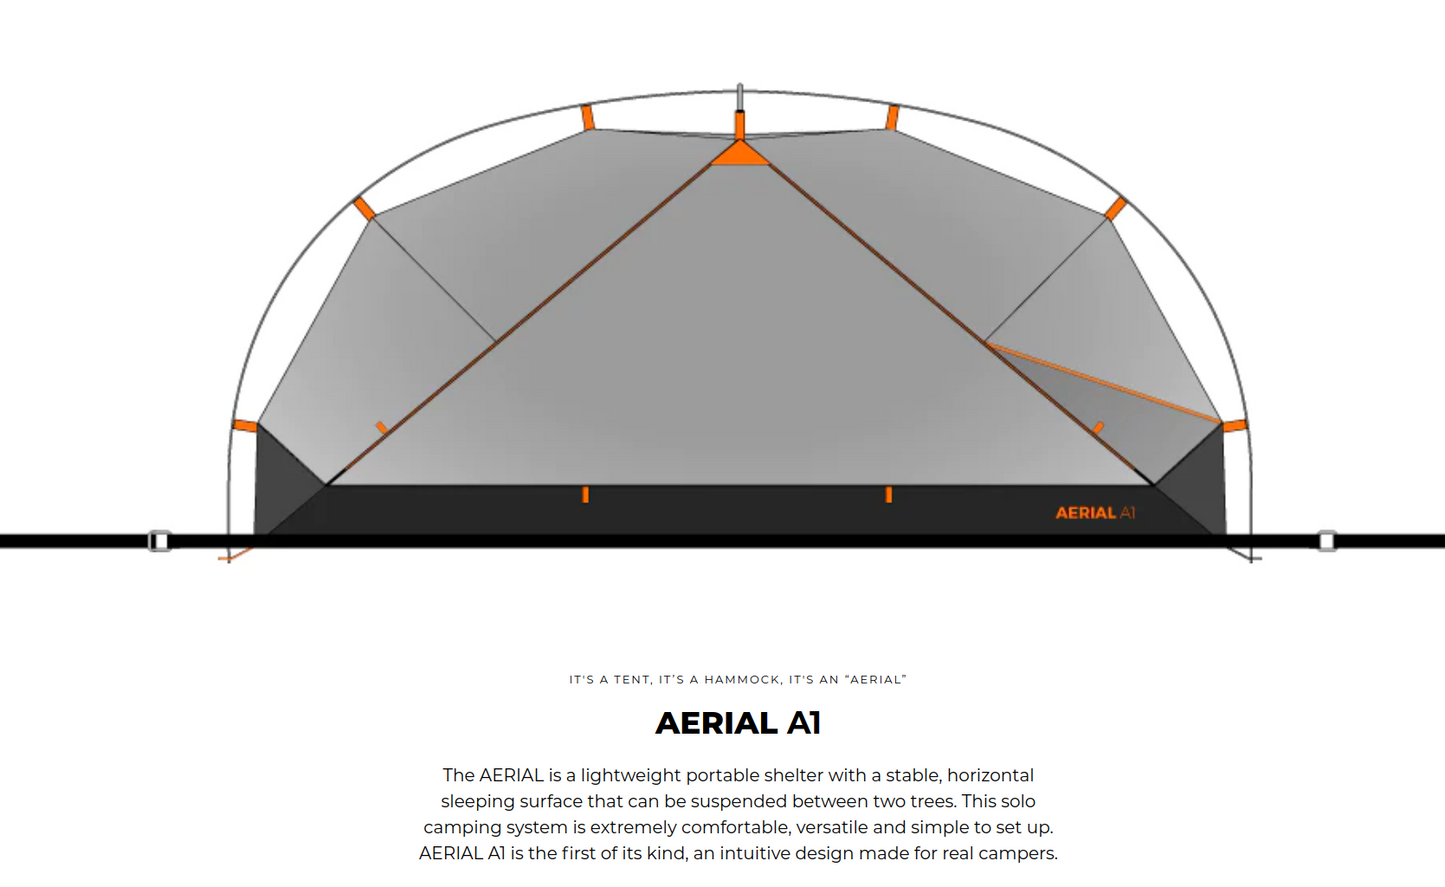 The AERIAL A1 Tree Tent - It's a tent, It's a hammock, It's an "AERIAL"